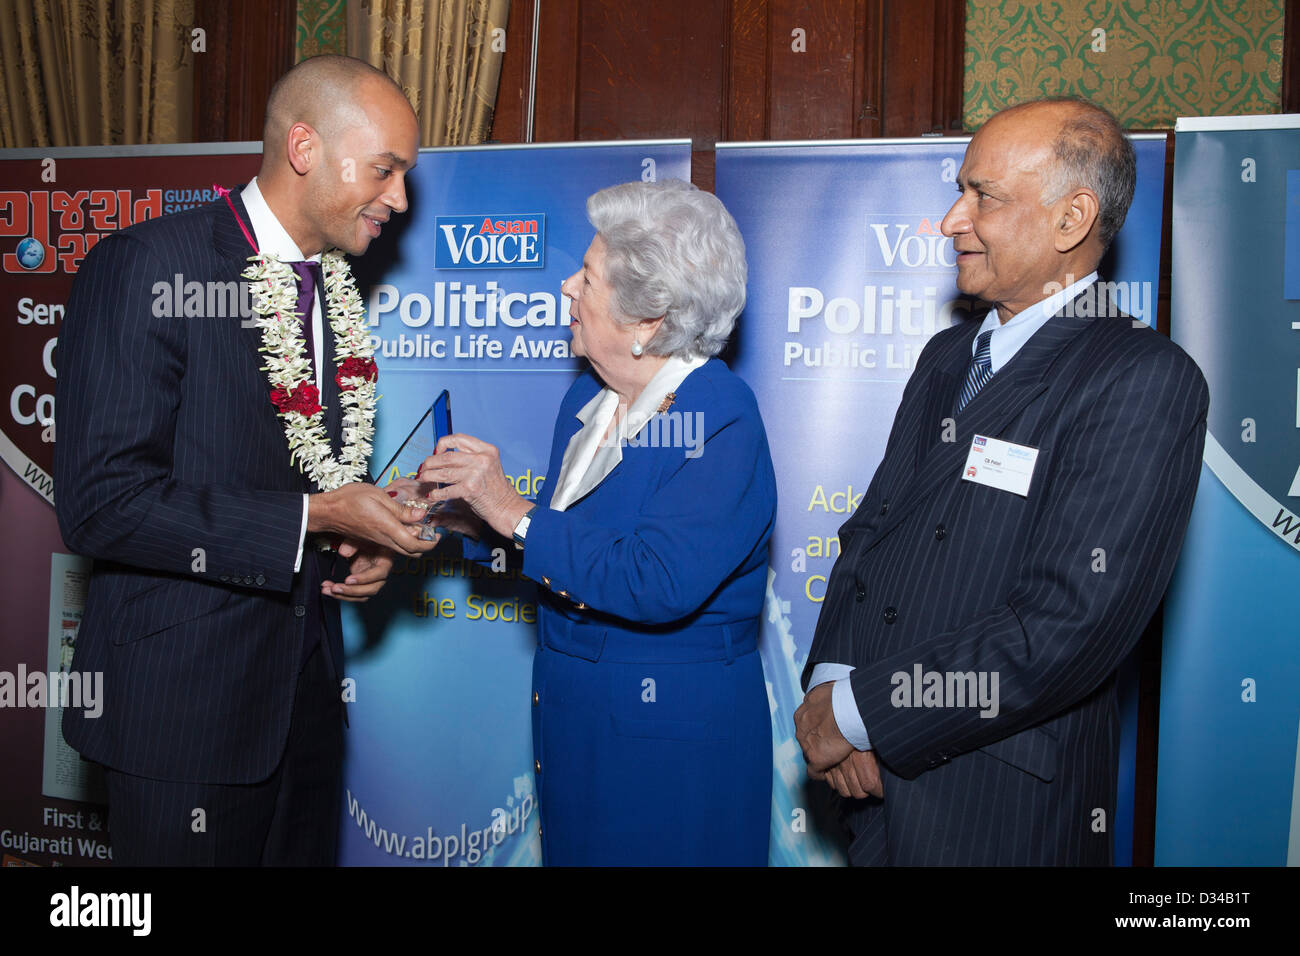 London, UK. 7th February 2013. On the right is Shadow Cabinet Secretary, Chuka Umunna, Member of Parliament being presented with an award for being The Shadow Cabinet Minister of the year by Guest of Honour, Baroness Betty Boothroyd, Former Speaker of the House of Commons at the Political and Public Life Awards 2013. On the right is C B Patel, Managing Director, Asian Voice newspaper. Stock Photo